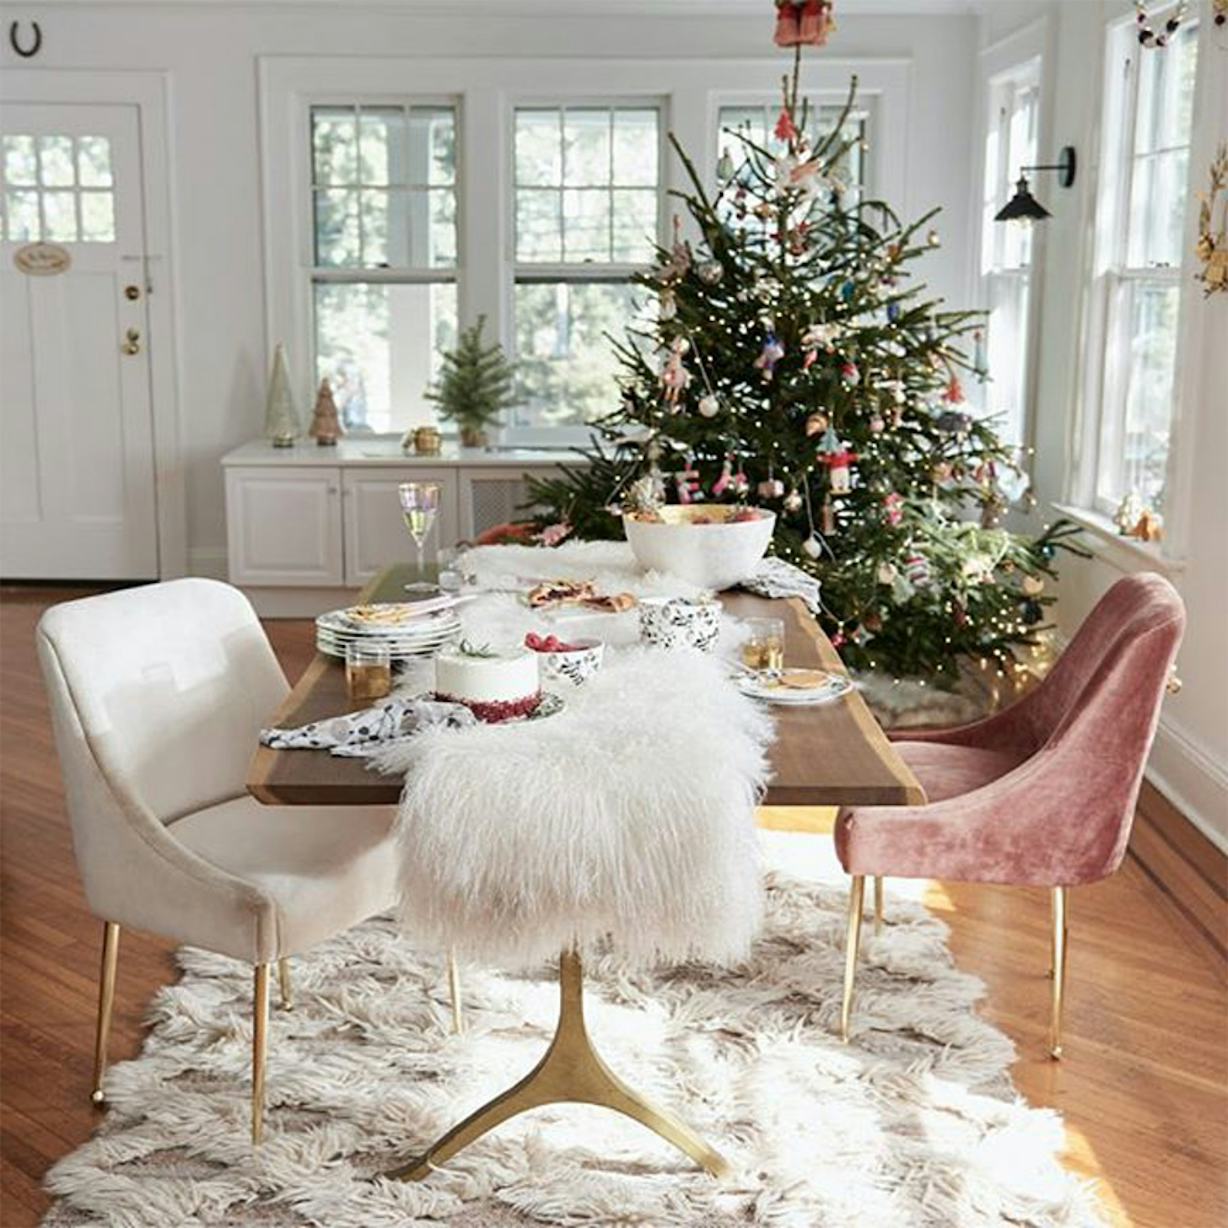 What To Buy During The Best AfterChristmas Decor Sales